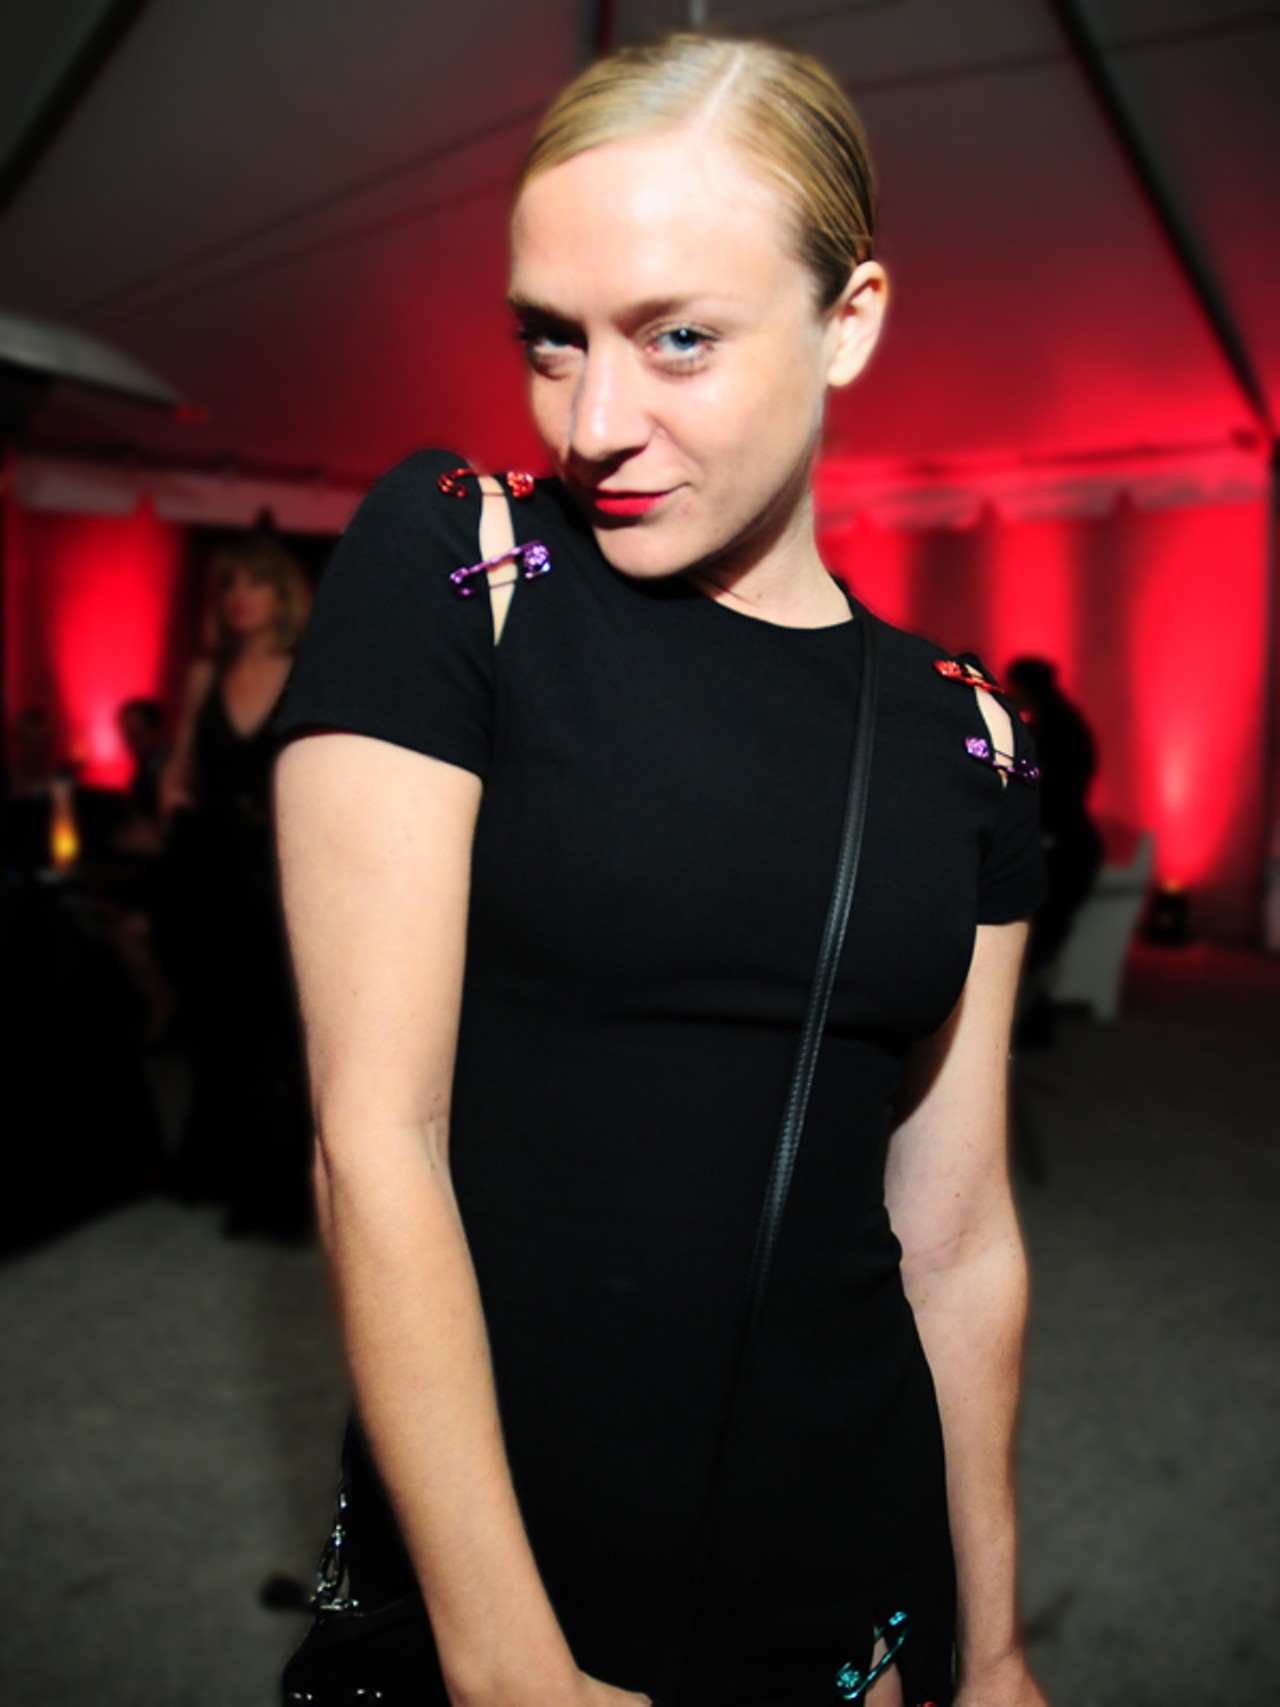 Former model and actress Chlo&euml; Sevigny was in St. Louis for the event on Saturday night. She apparently hit up the bars later with Derek Blasberg, another featured guest.